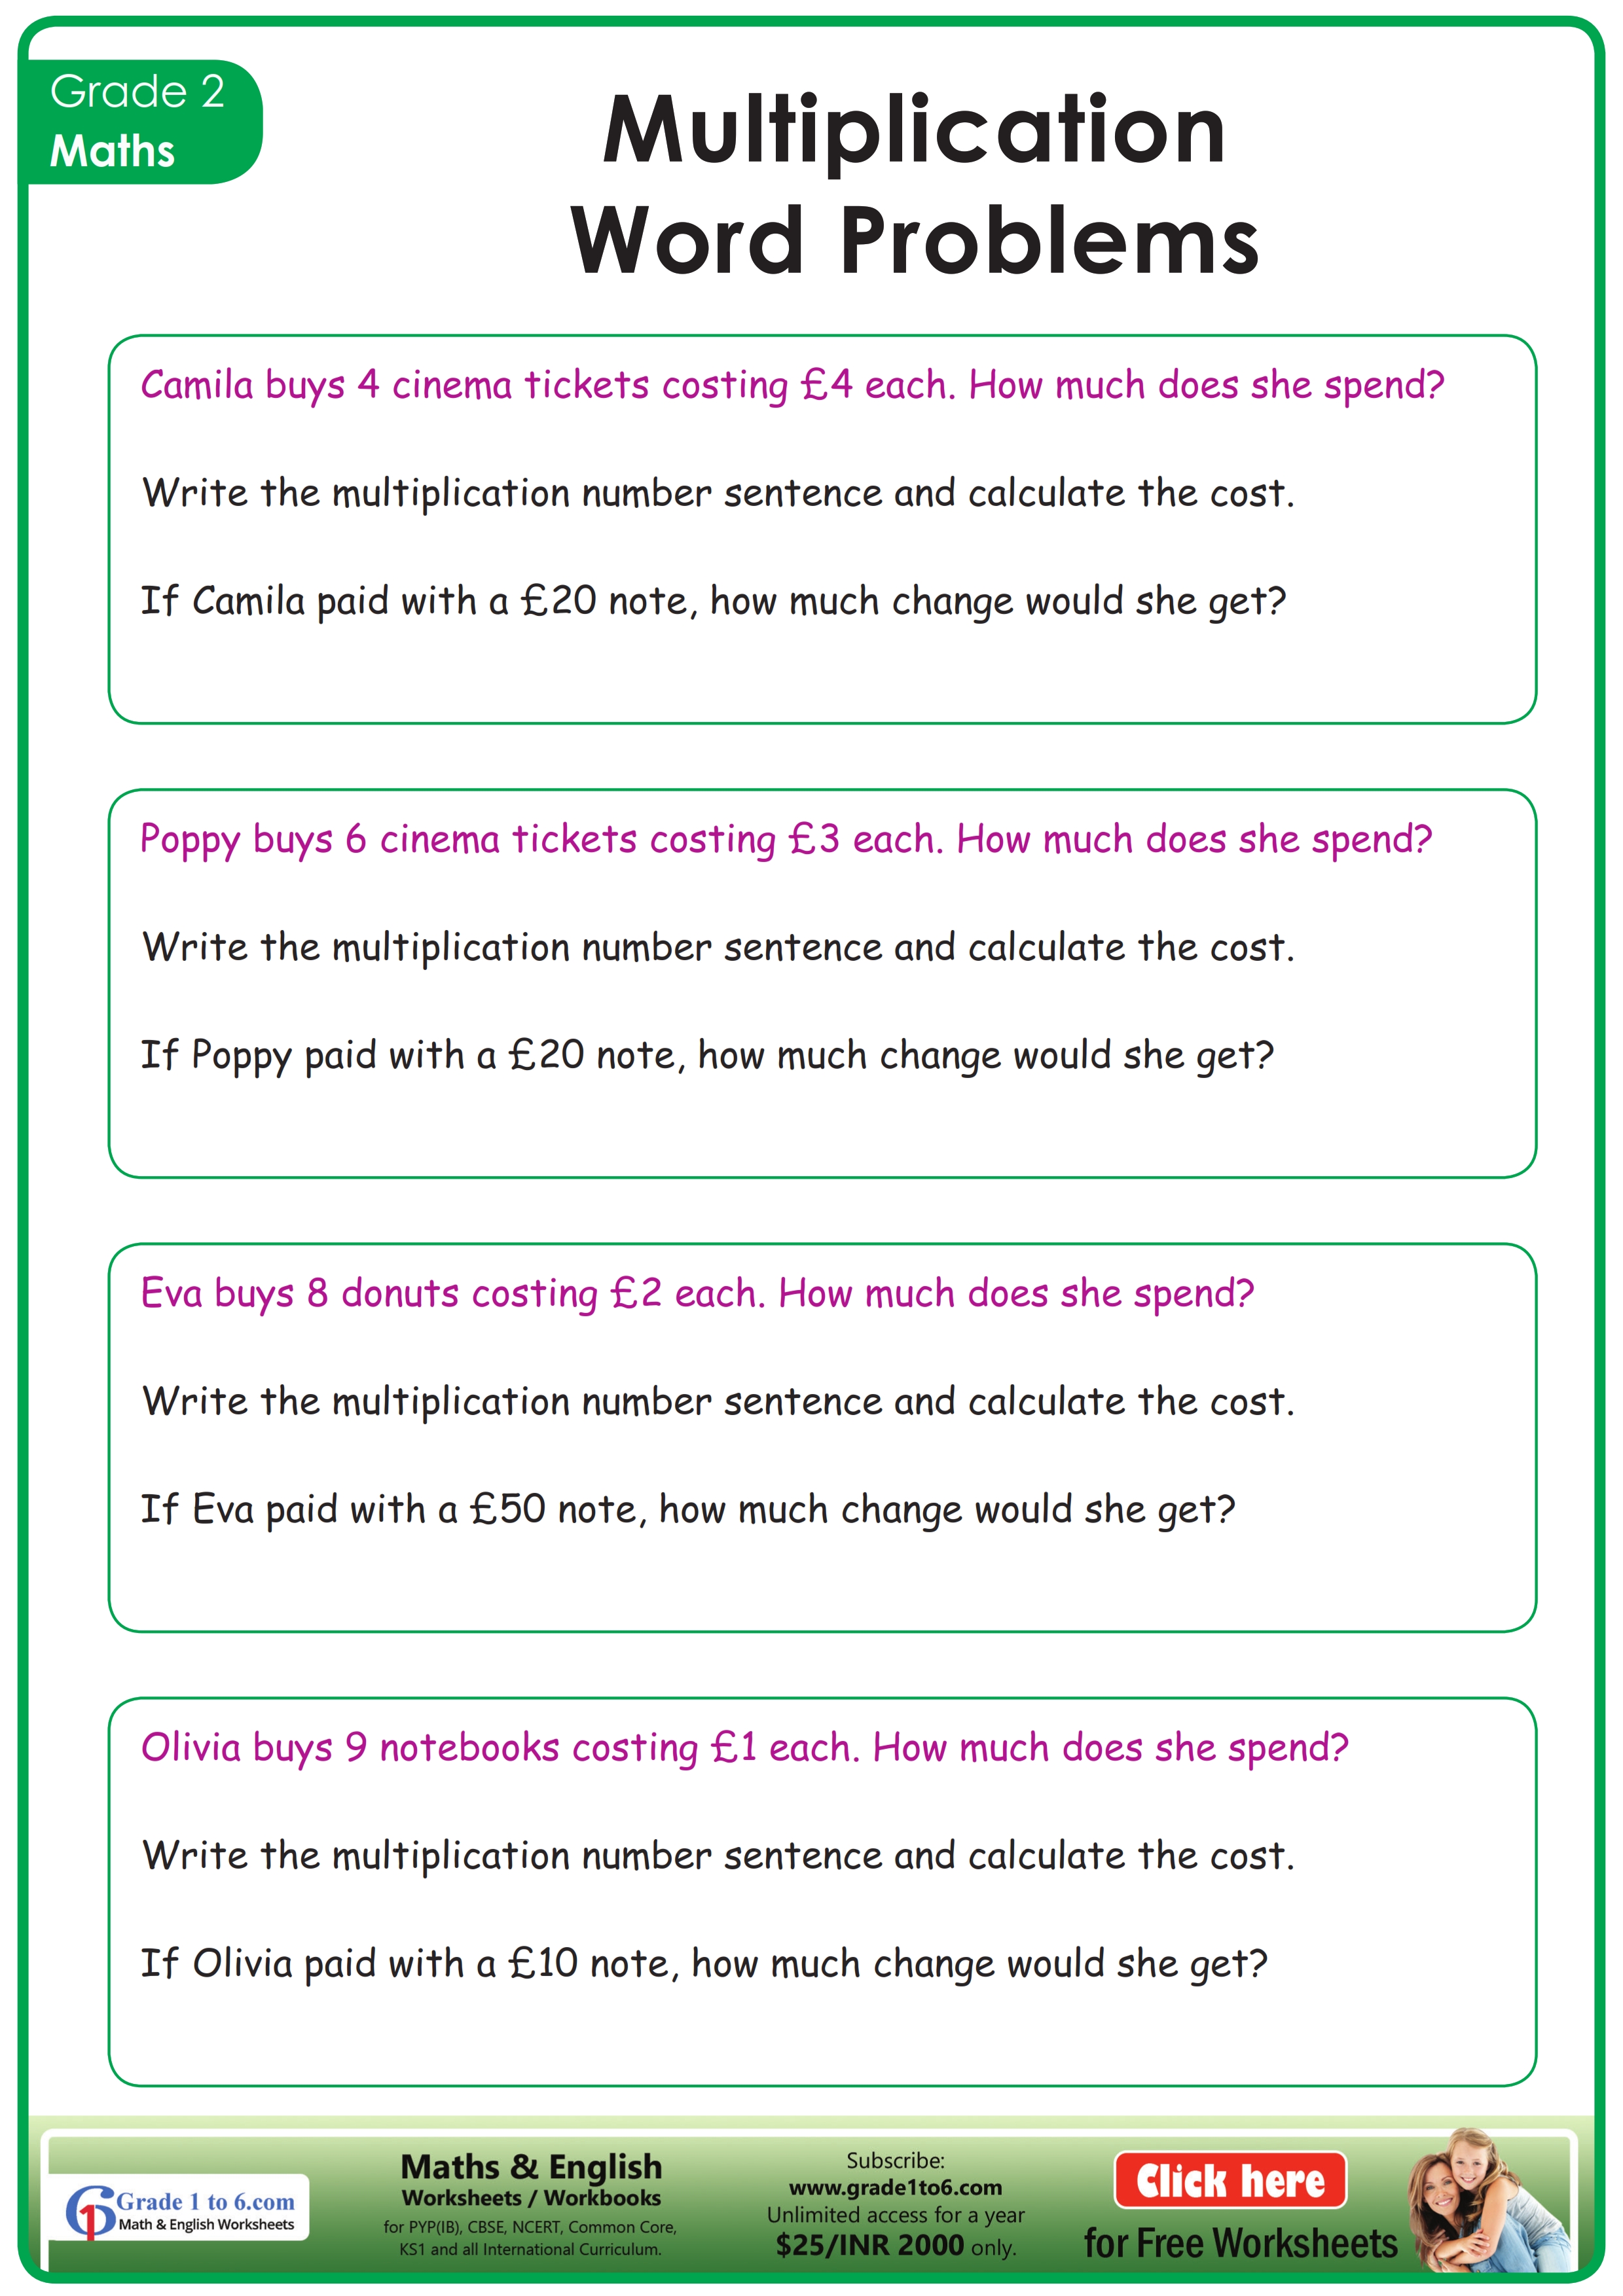 Multiplication Worksheet For Class 3 Word Problems